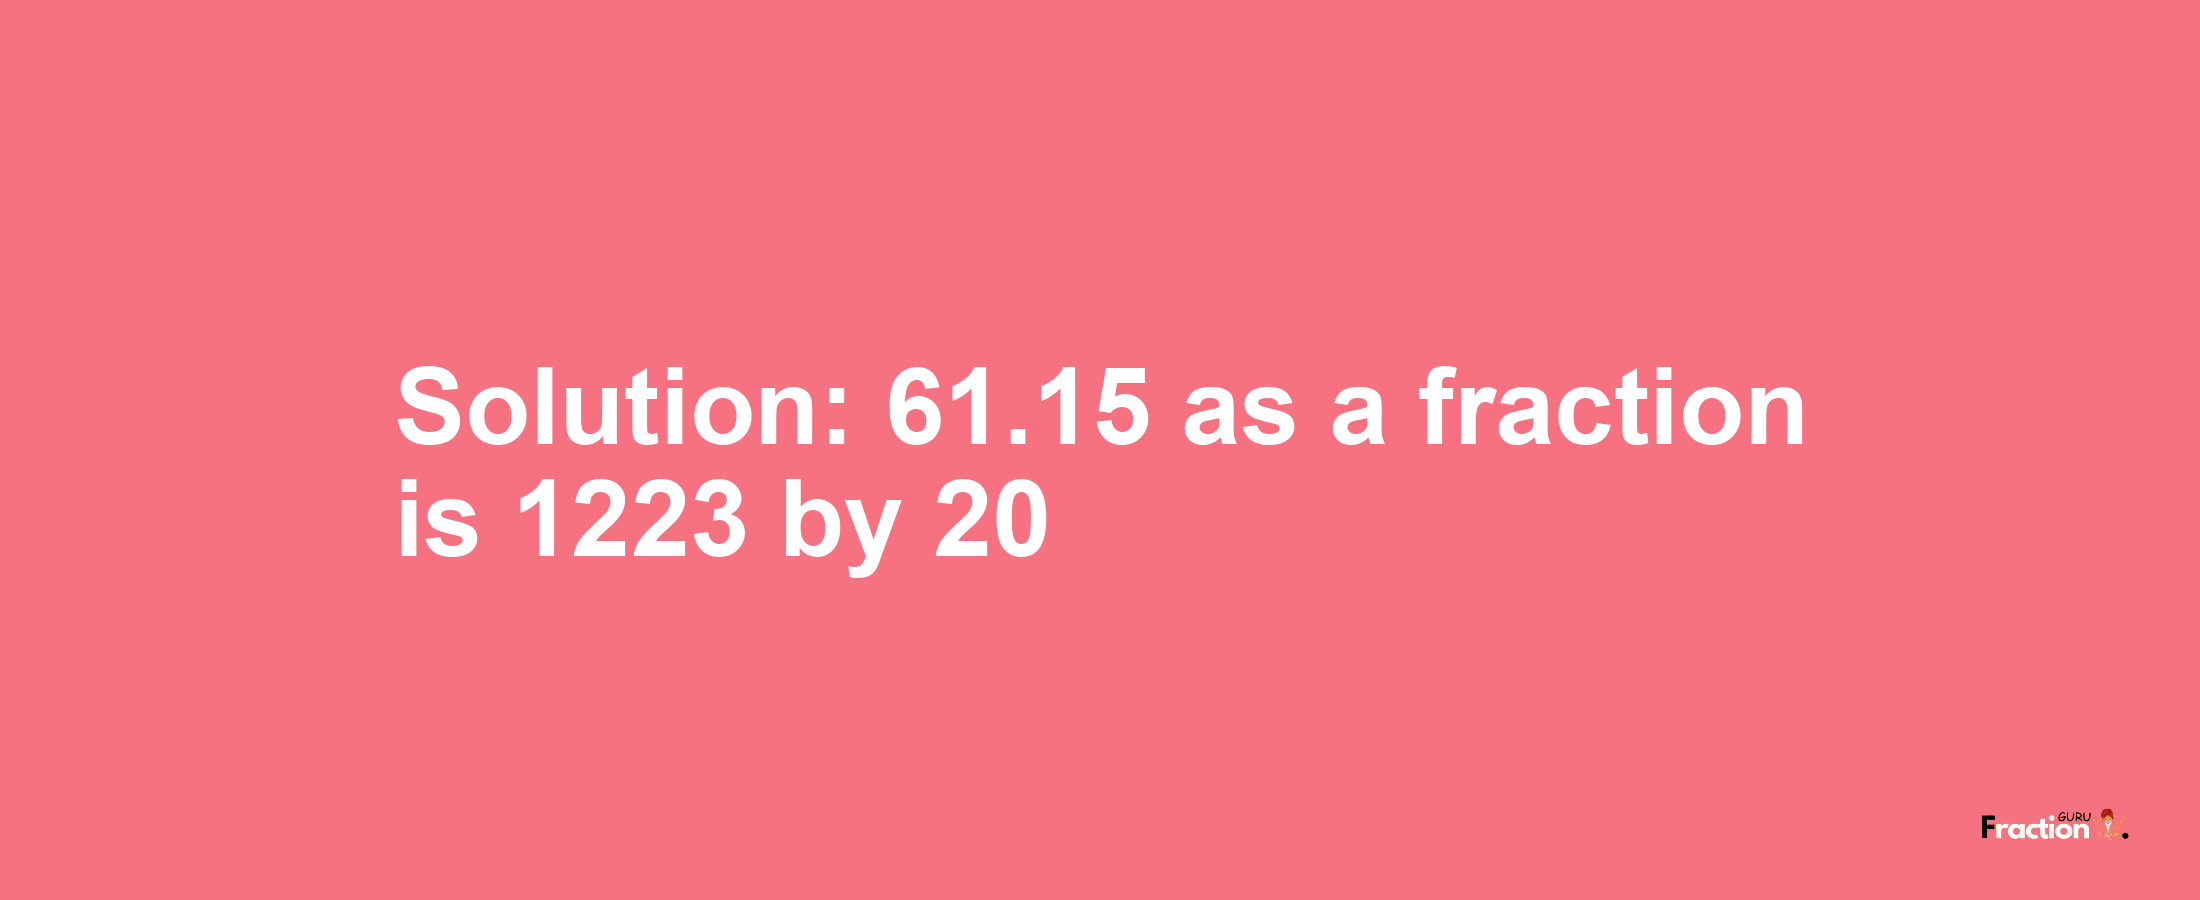 Solution:61.15 as a fraction is 1223/20